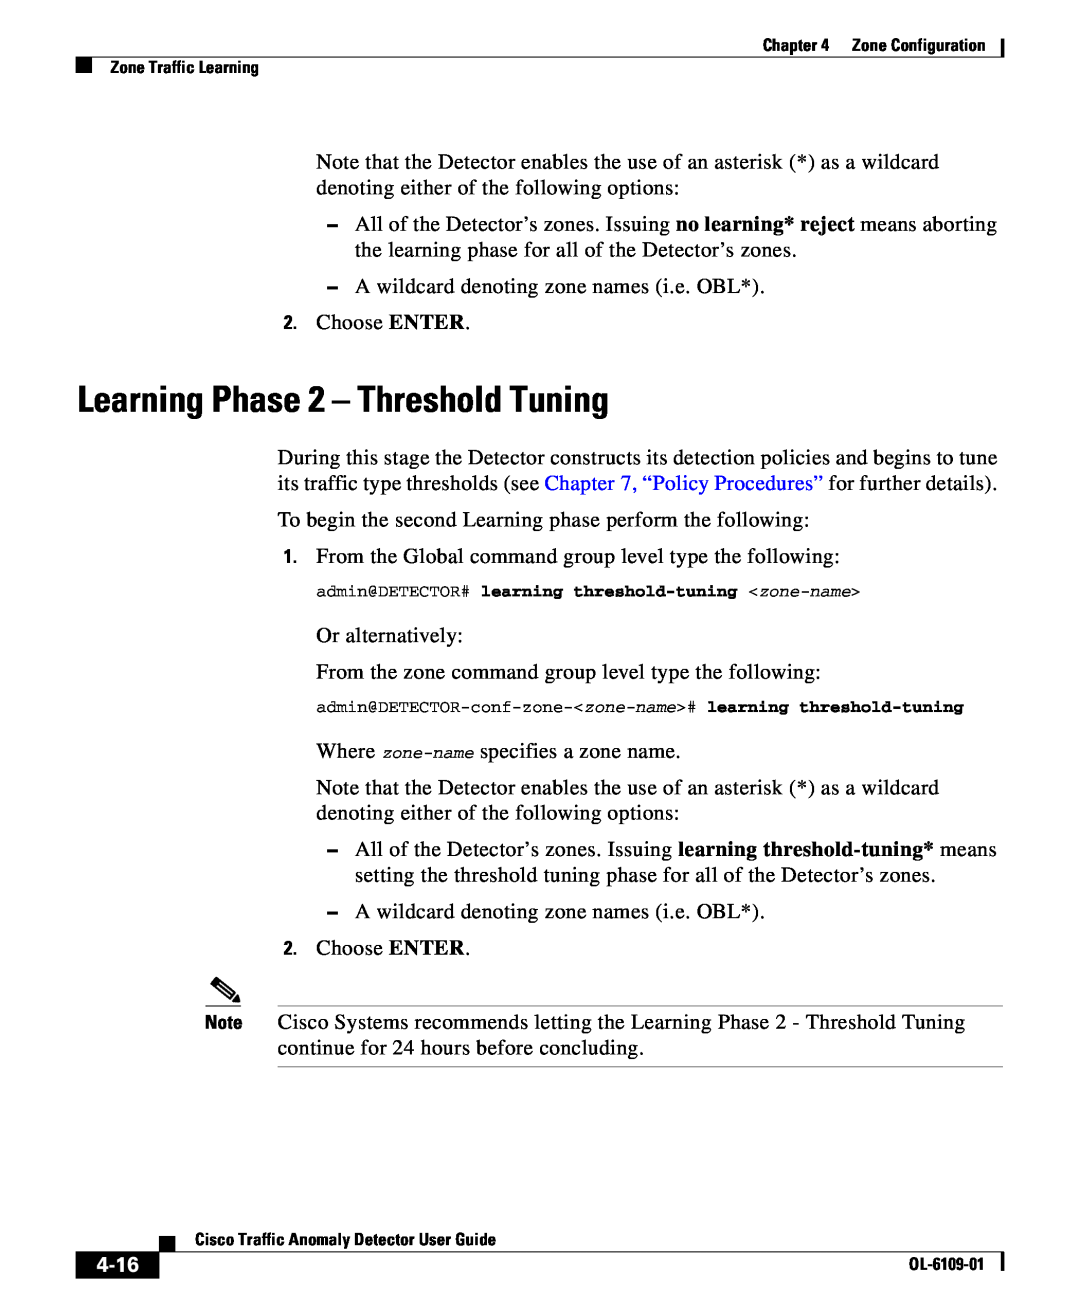 Cisco Systems OL-6109-01 Learning Phase 2 - Threshold Tuning, 4-16, admin@DETECTOR# learning threshold-tuning zone-name 